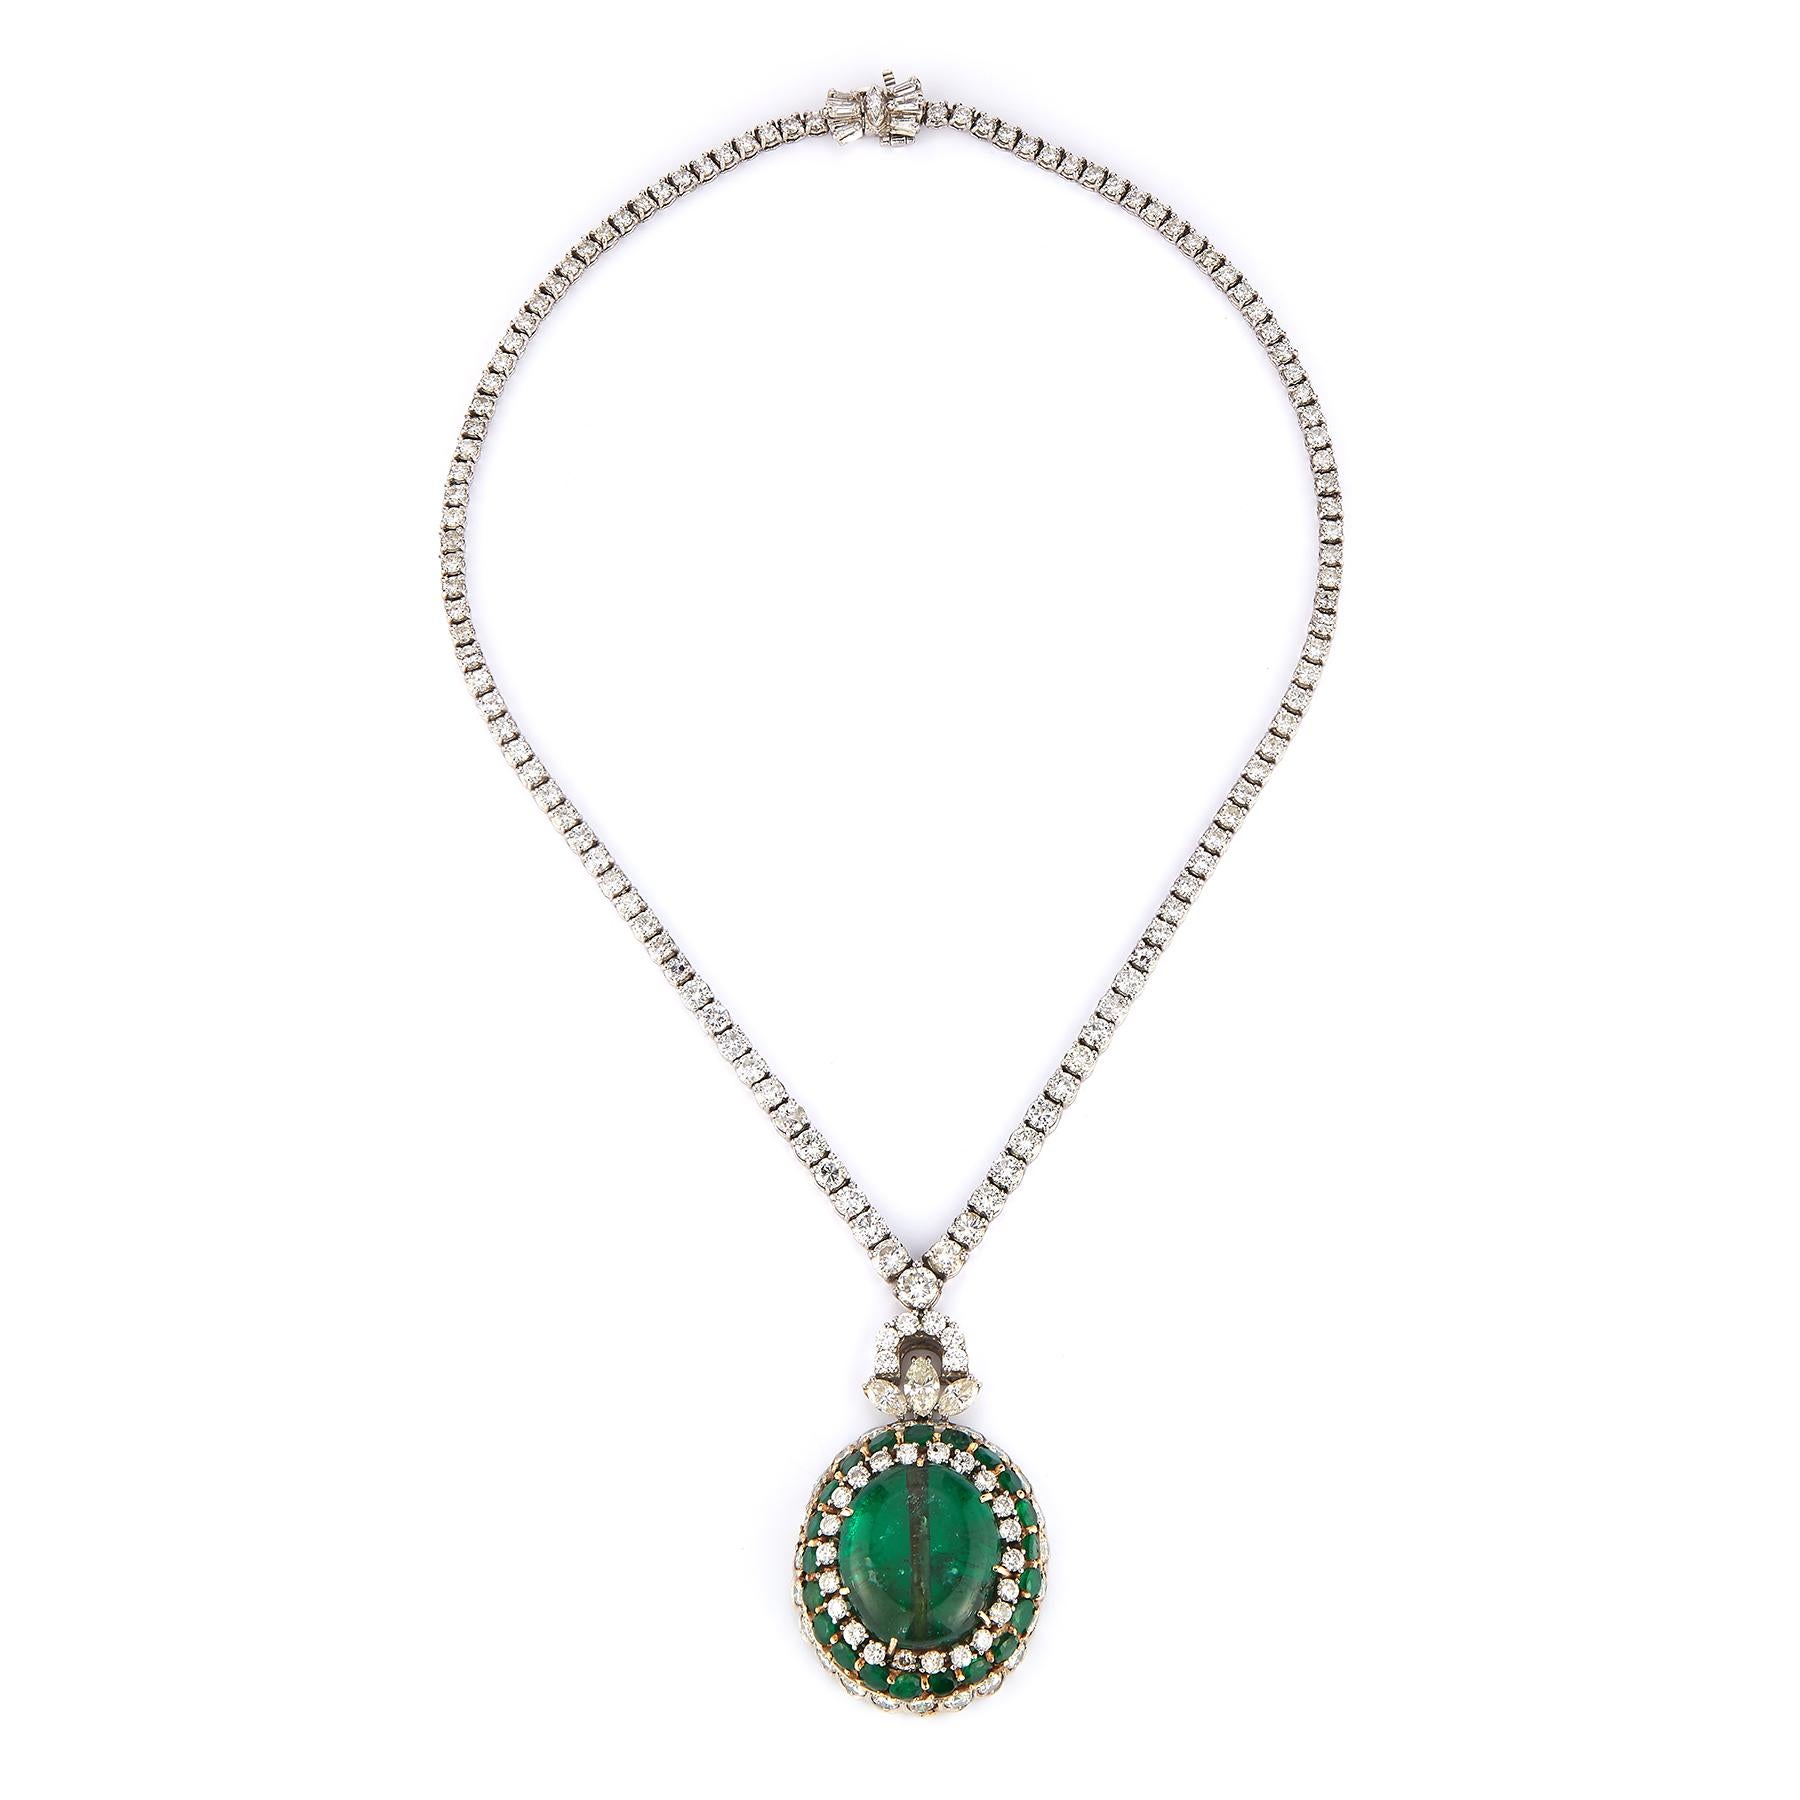 Antique Mughal Certified Emerald Bead and Diamond Necklace
Center Antique Mughal Emerald bead approximately 35 carats
Set in a later diamond necklace
21 surrounding emeralds approximately 3.50 carats
Diamond Weight approximately: 16.60 carats